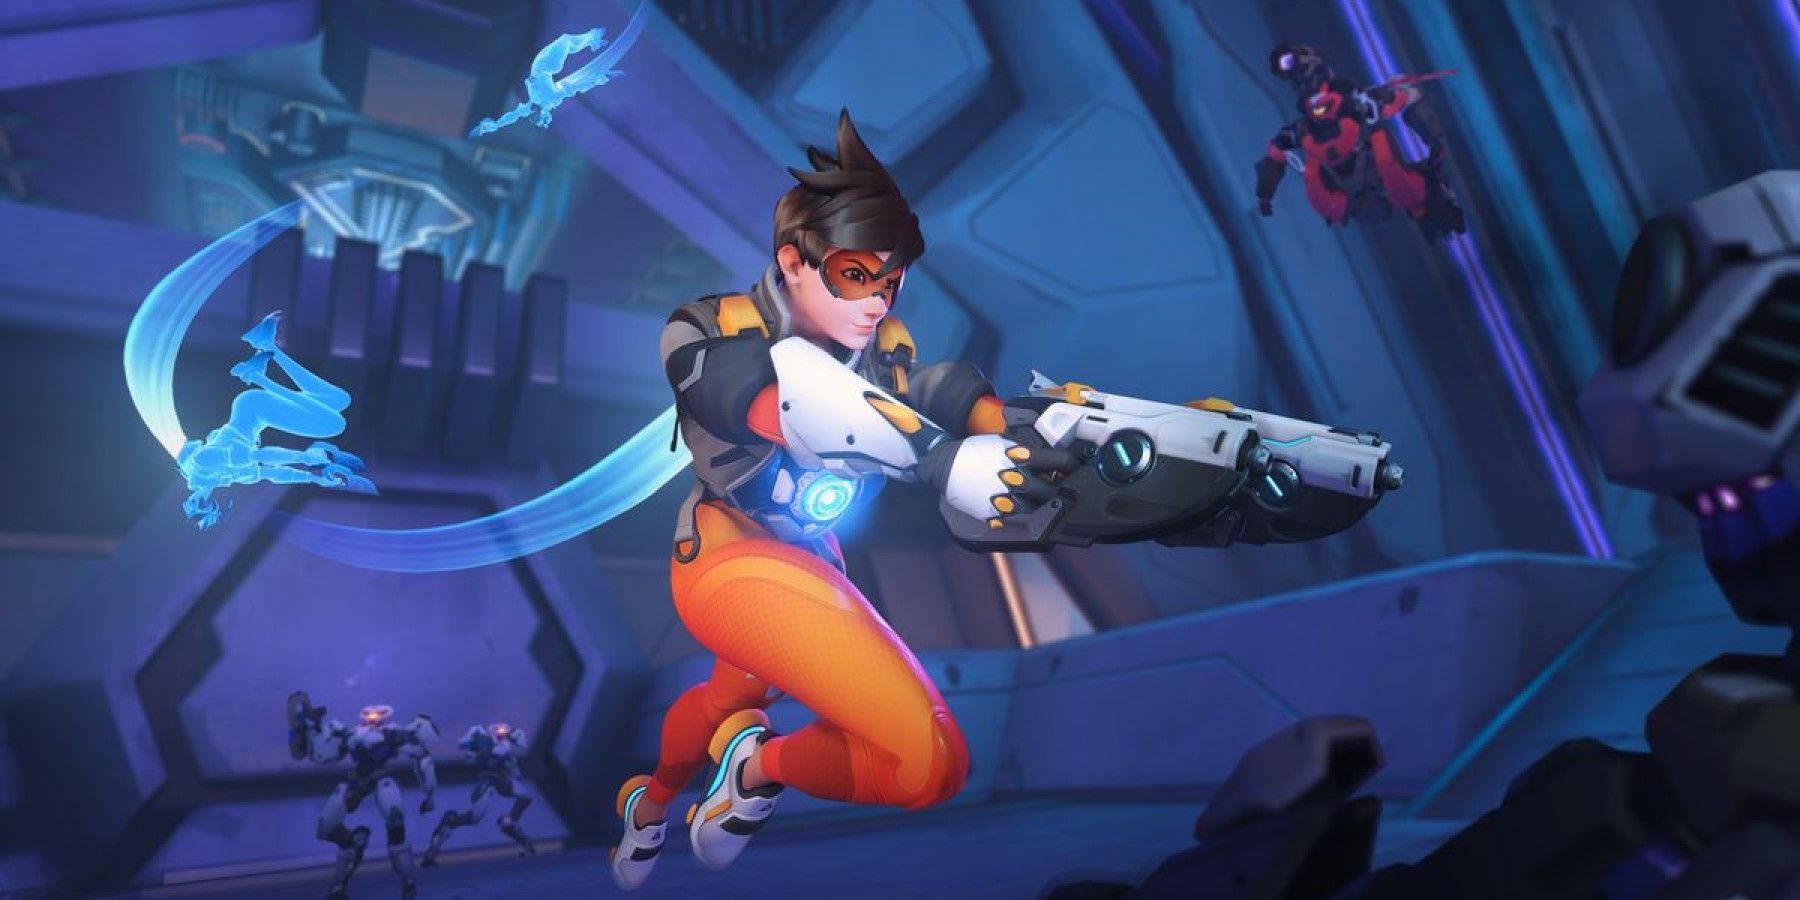 tracer from overwatch 2 pve story missions